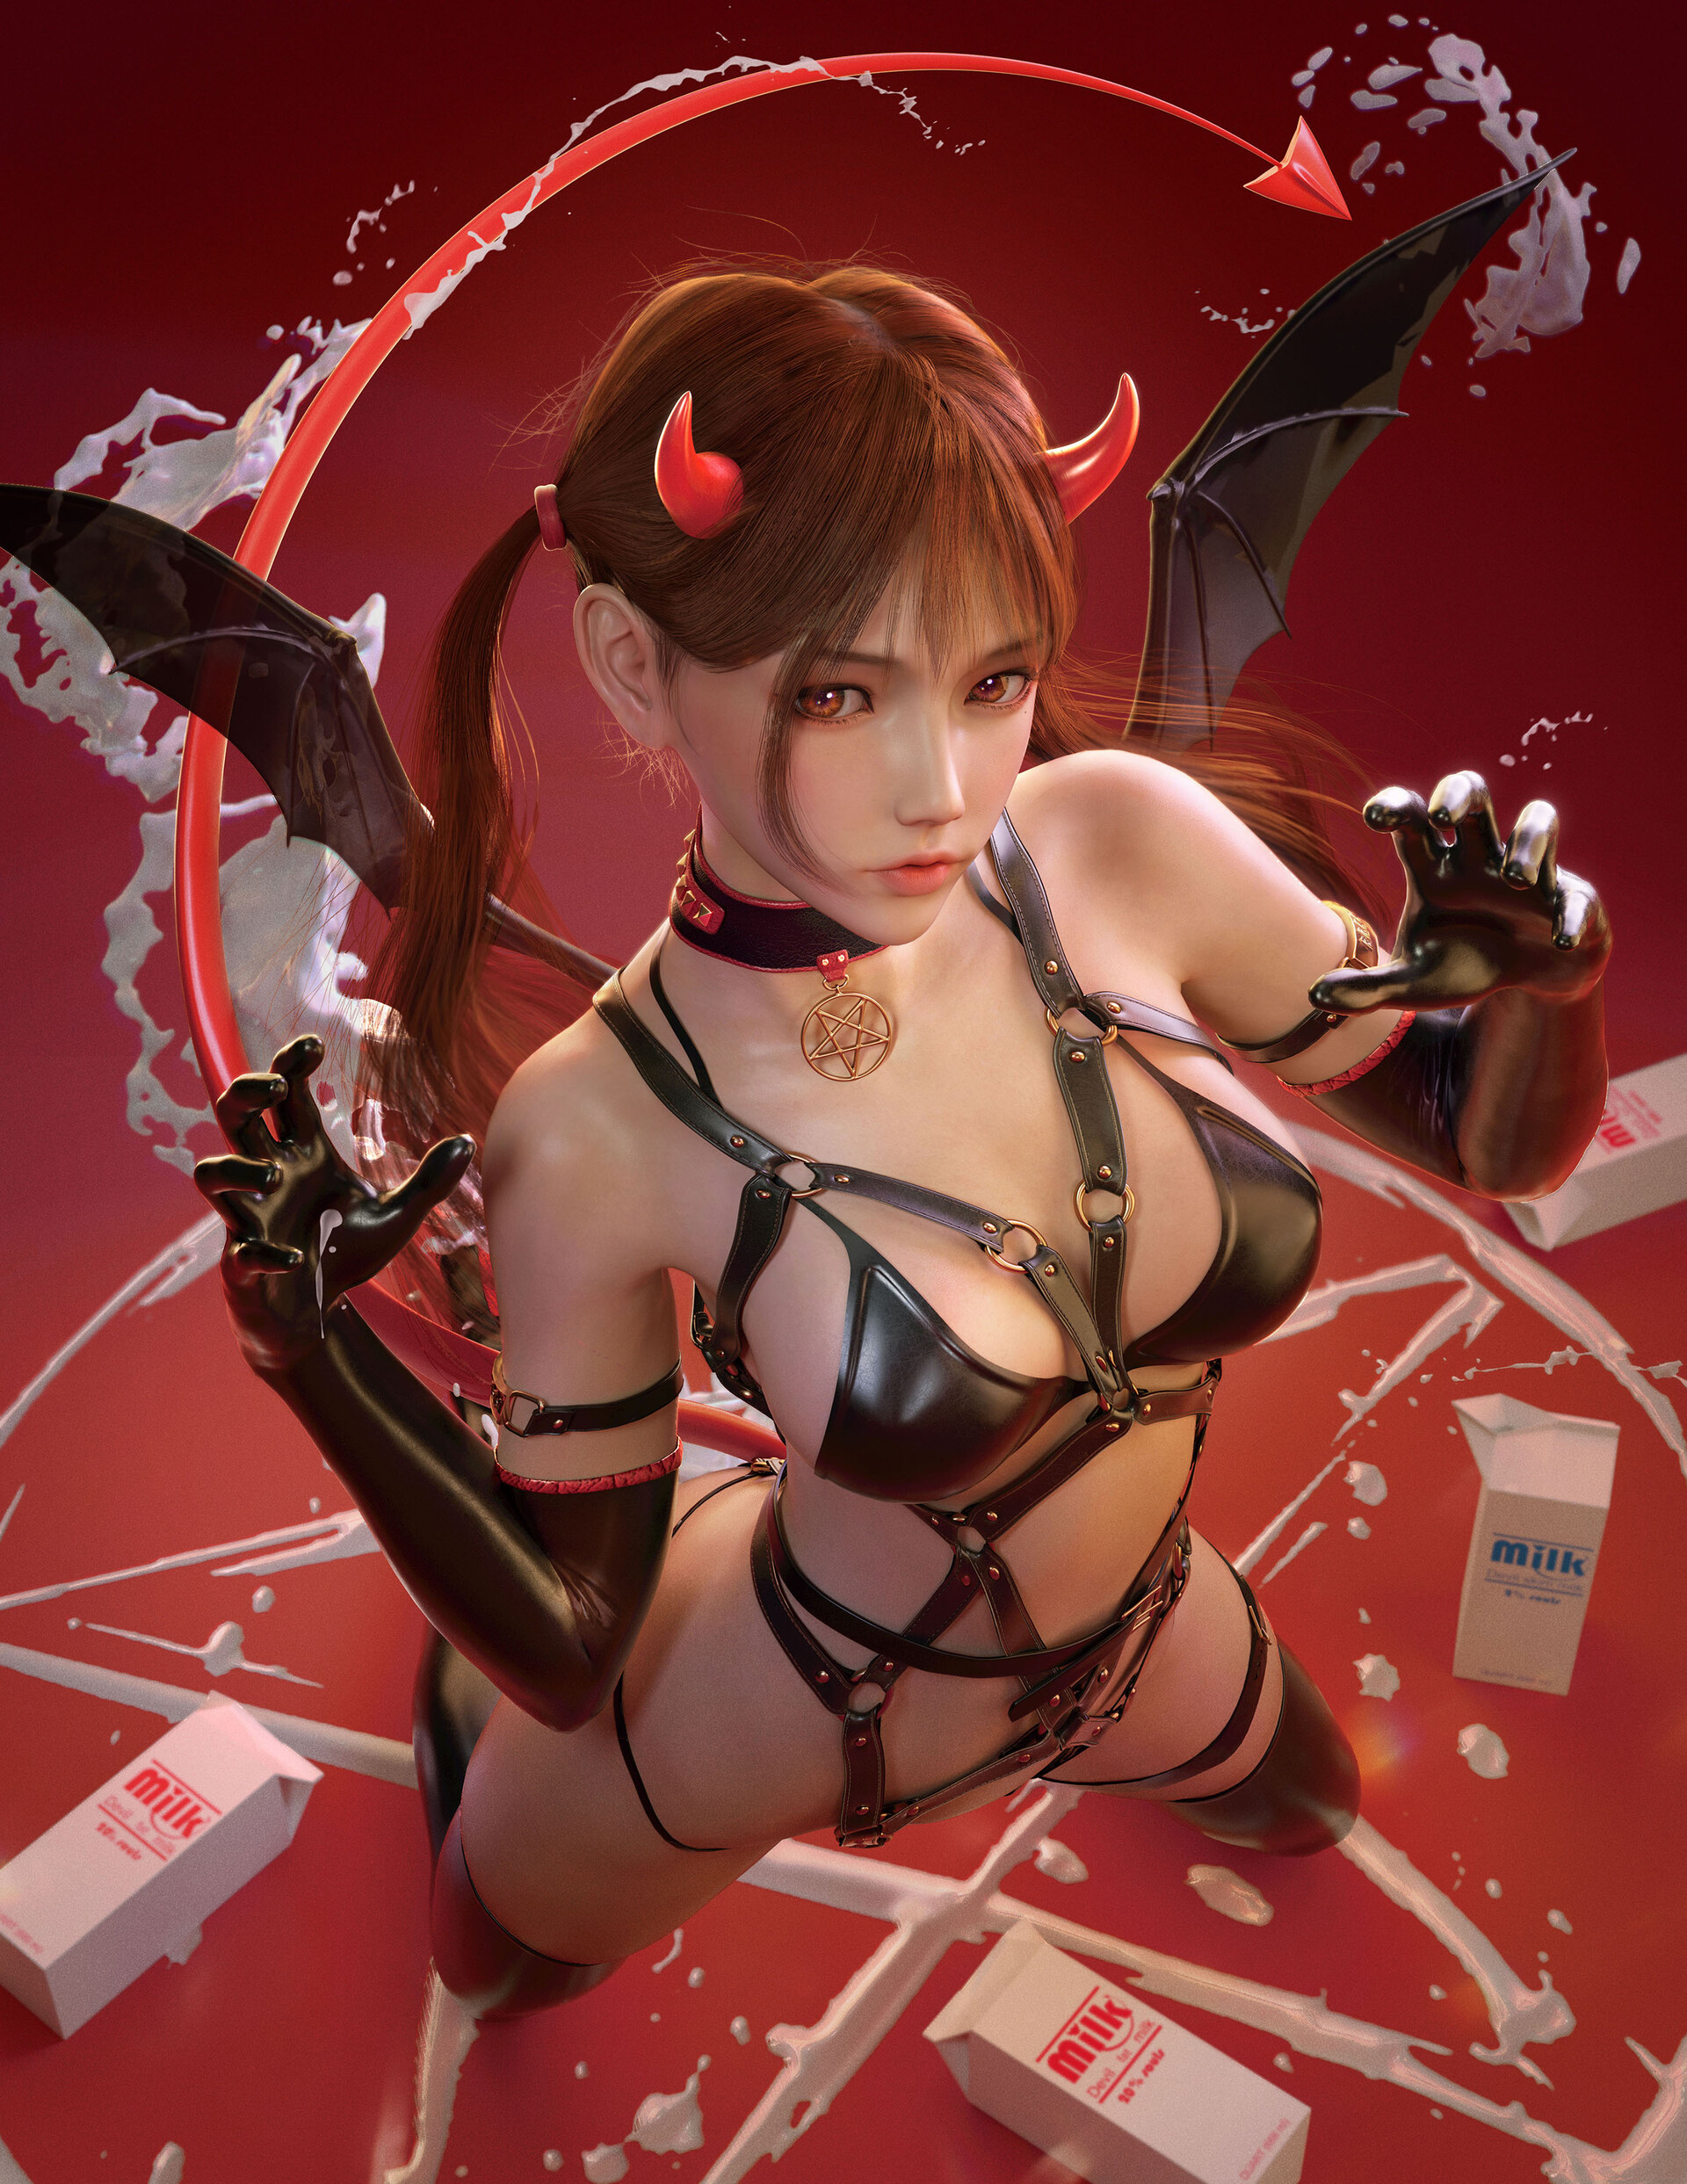 General 1920x2486 Yuan Yuan CGI women succubus demon redhead twintails horns red eyes looking at viewer straps leather elbow gloves bodysuit wings tail high angle milk messy red